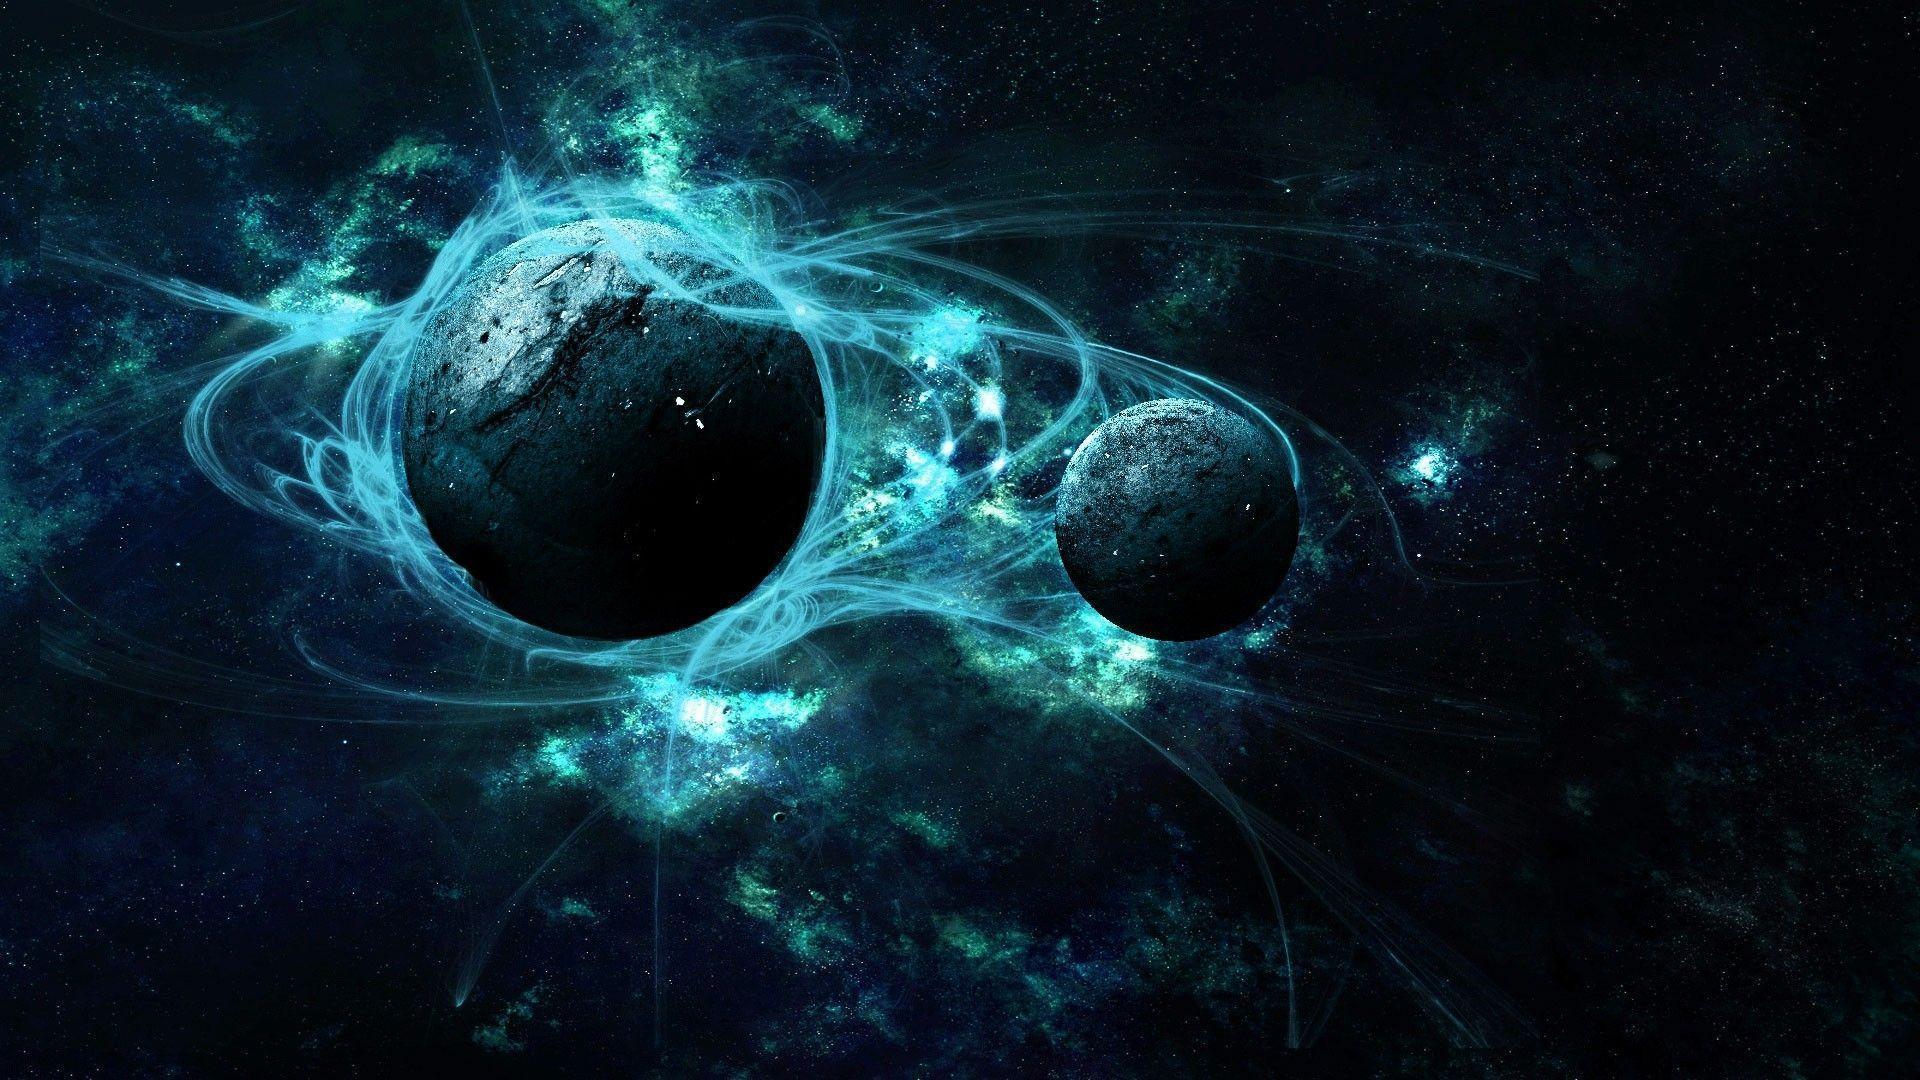 Outer Space Planets Solar System Background 1 HD Wallpaper. lzamgs